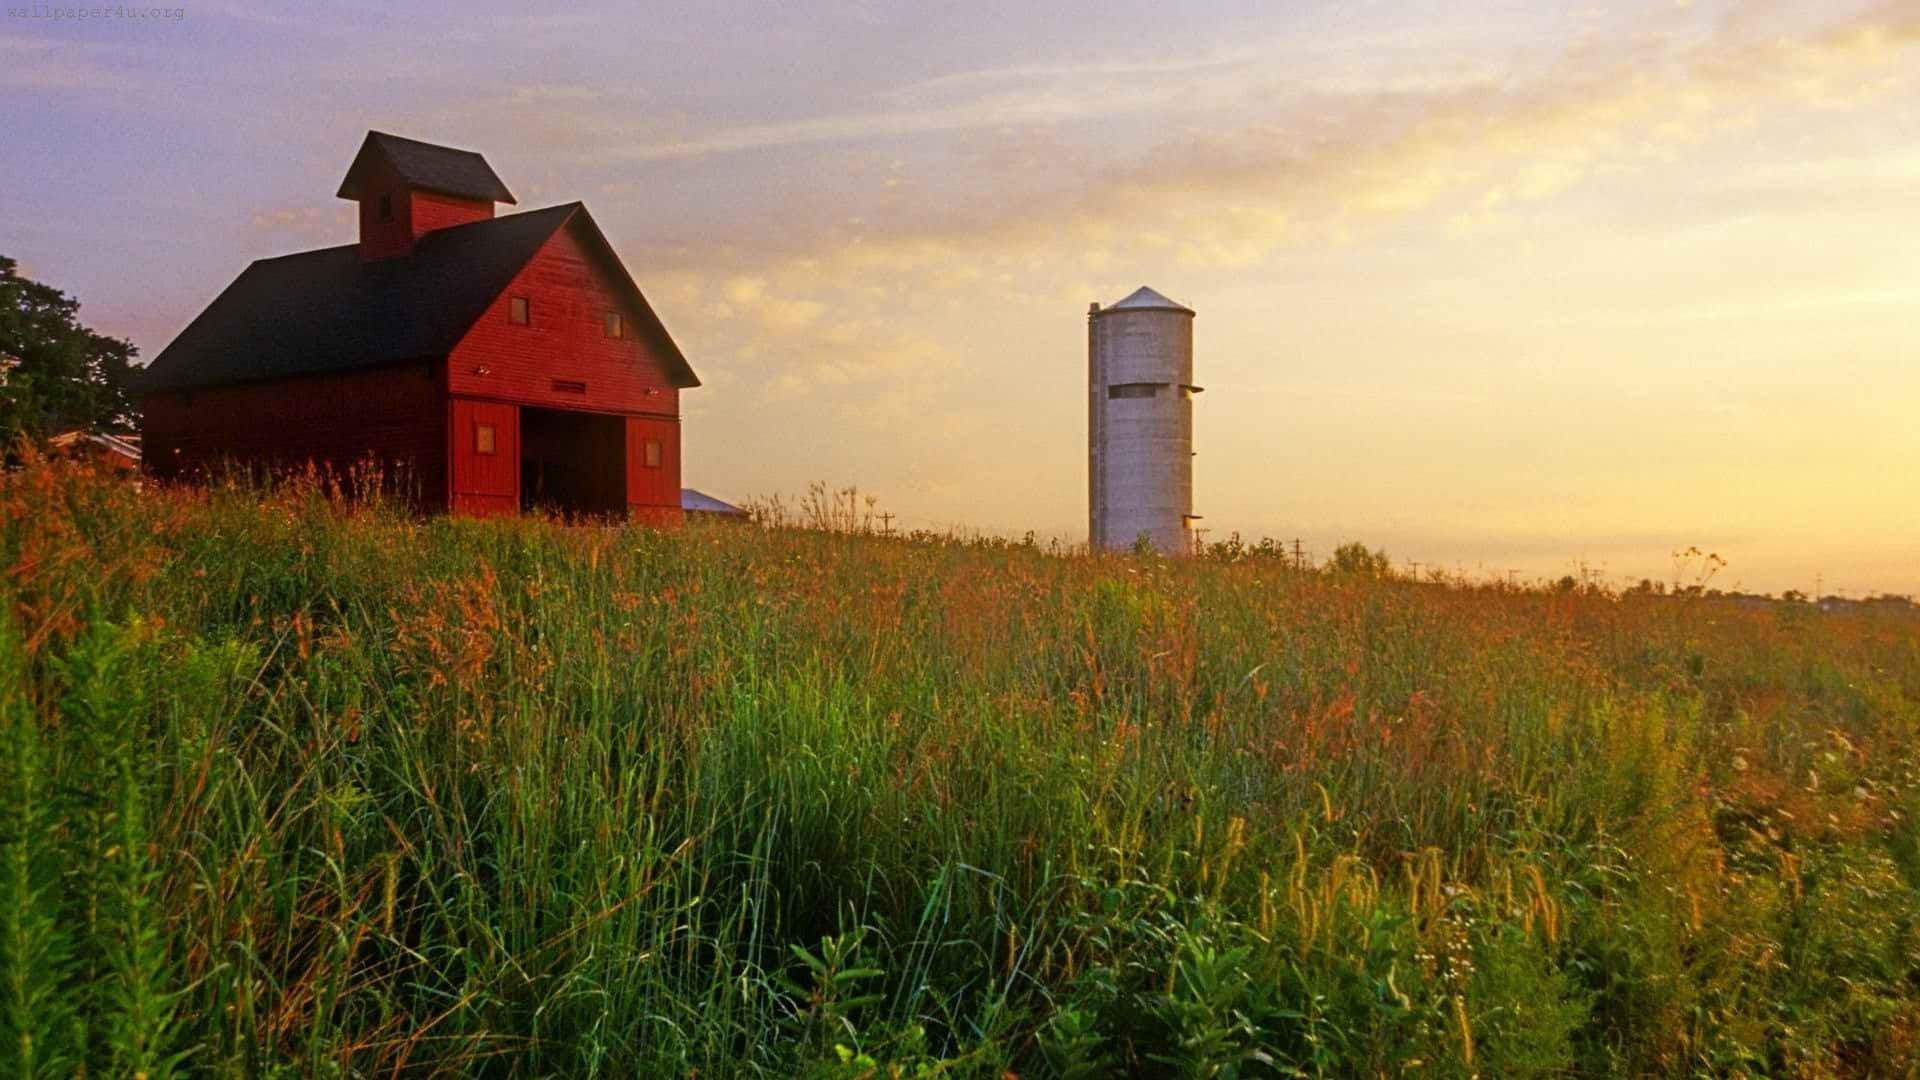 Red Barn With Grass Country Scenes Wallpaper